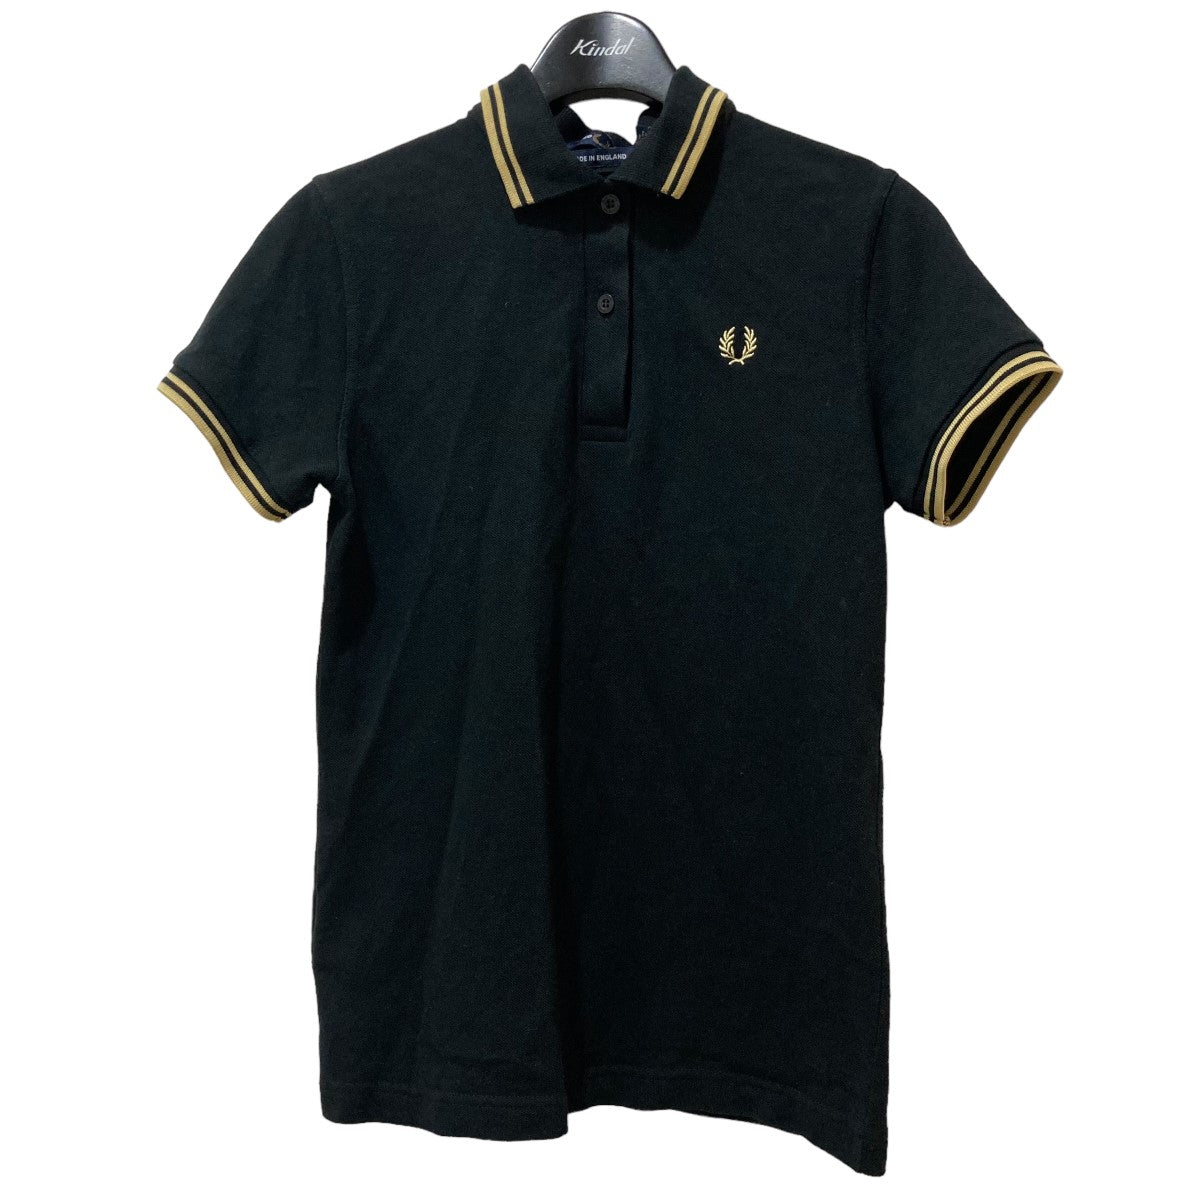 FRED PERRY(フレッドペリー) SINGLE TIPPED FRED PERRY SHIRT 